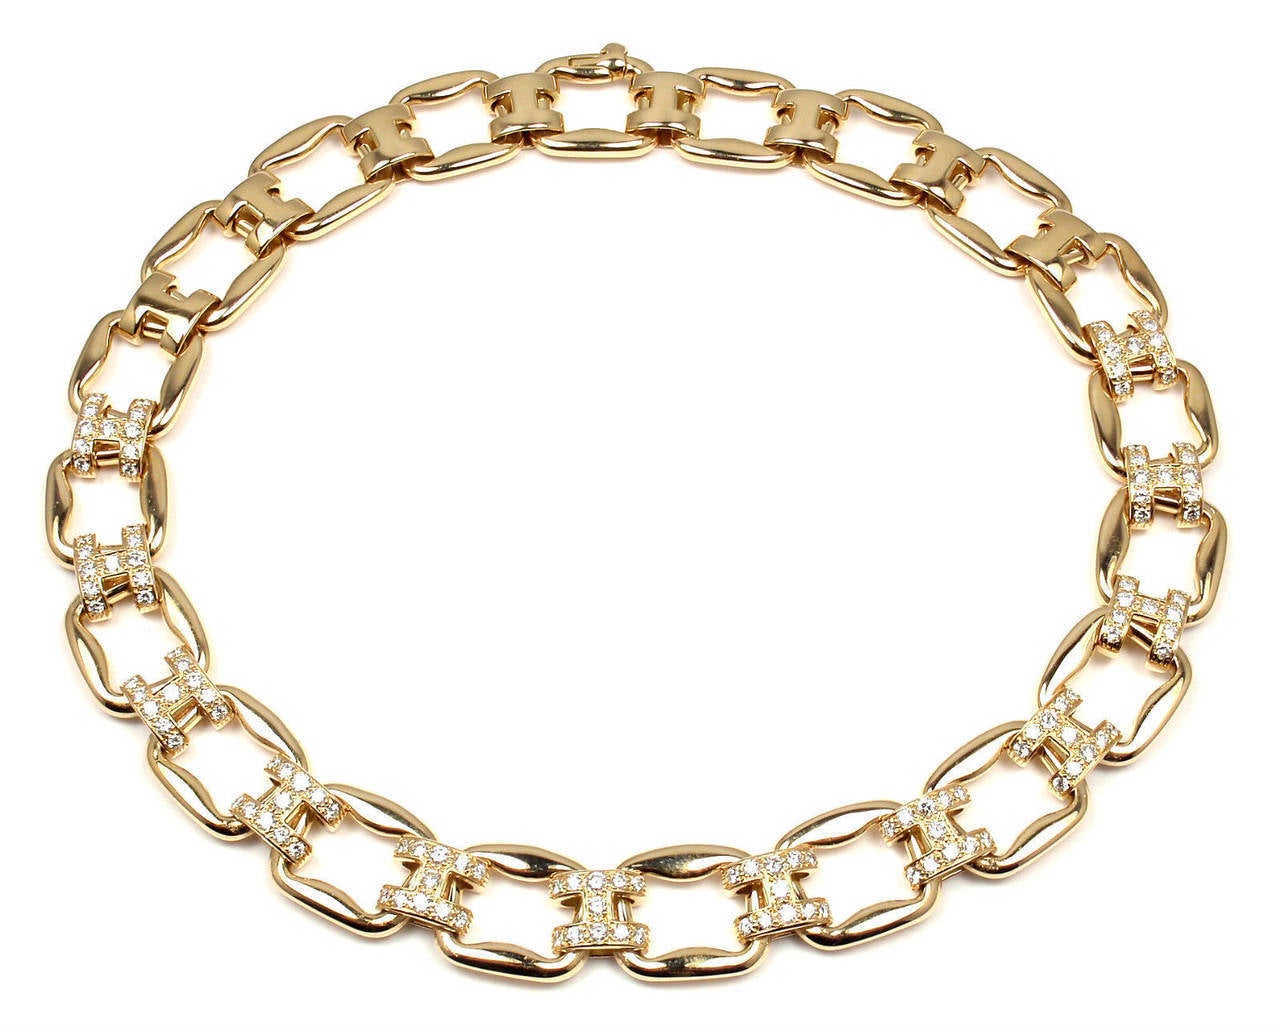 18k Yellow Gold Diamond H Large Link Necklace by Hermes.
With 132 Round Brilliant Cut Diamonds
Total Diamond Weight: Approx: 4.35ct VVS1 clarity E color

Details:
Length: 16